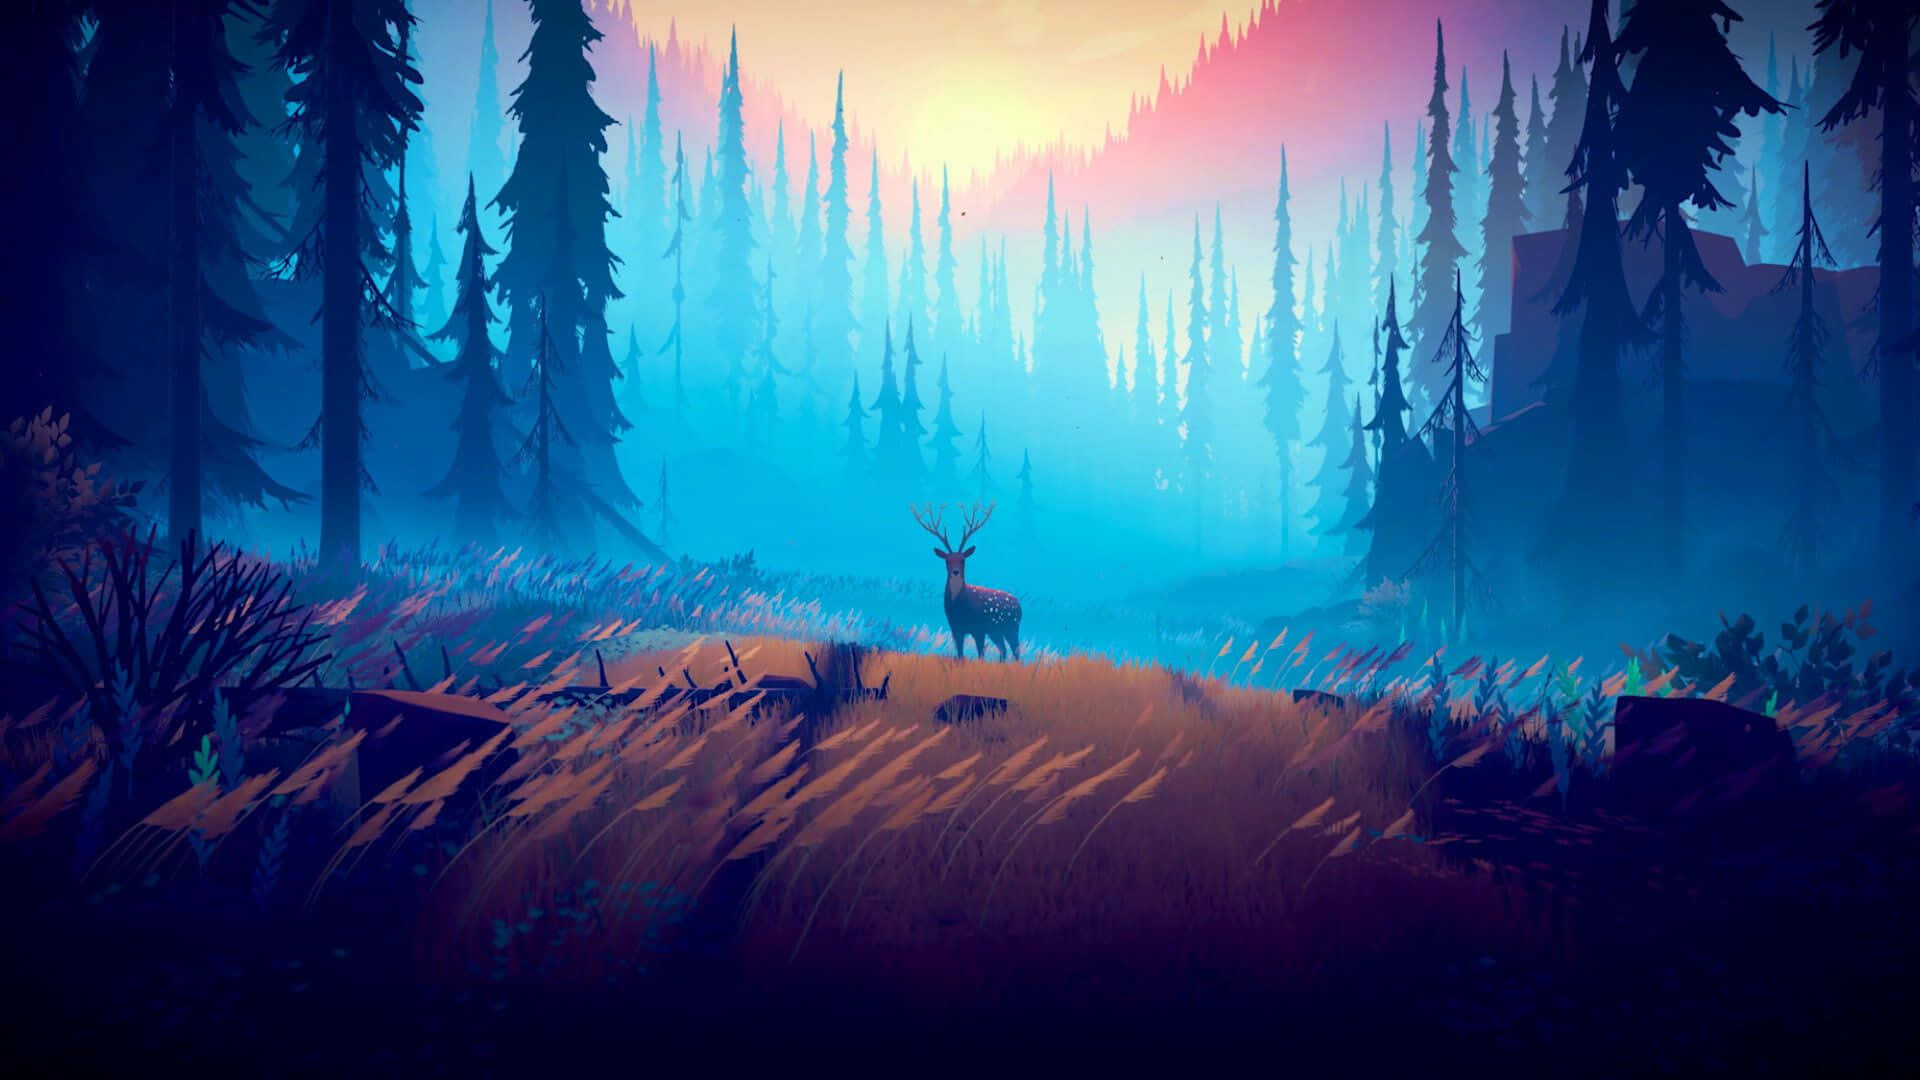 A Deer In The Forest At Sunset Wallpaper